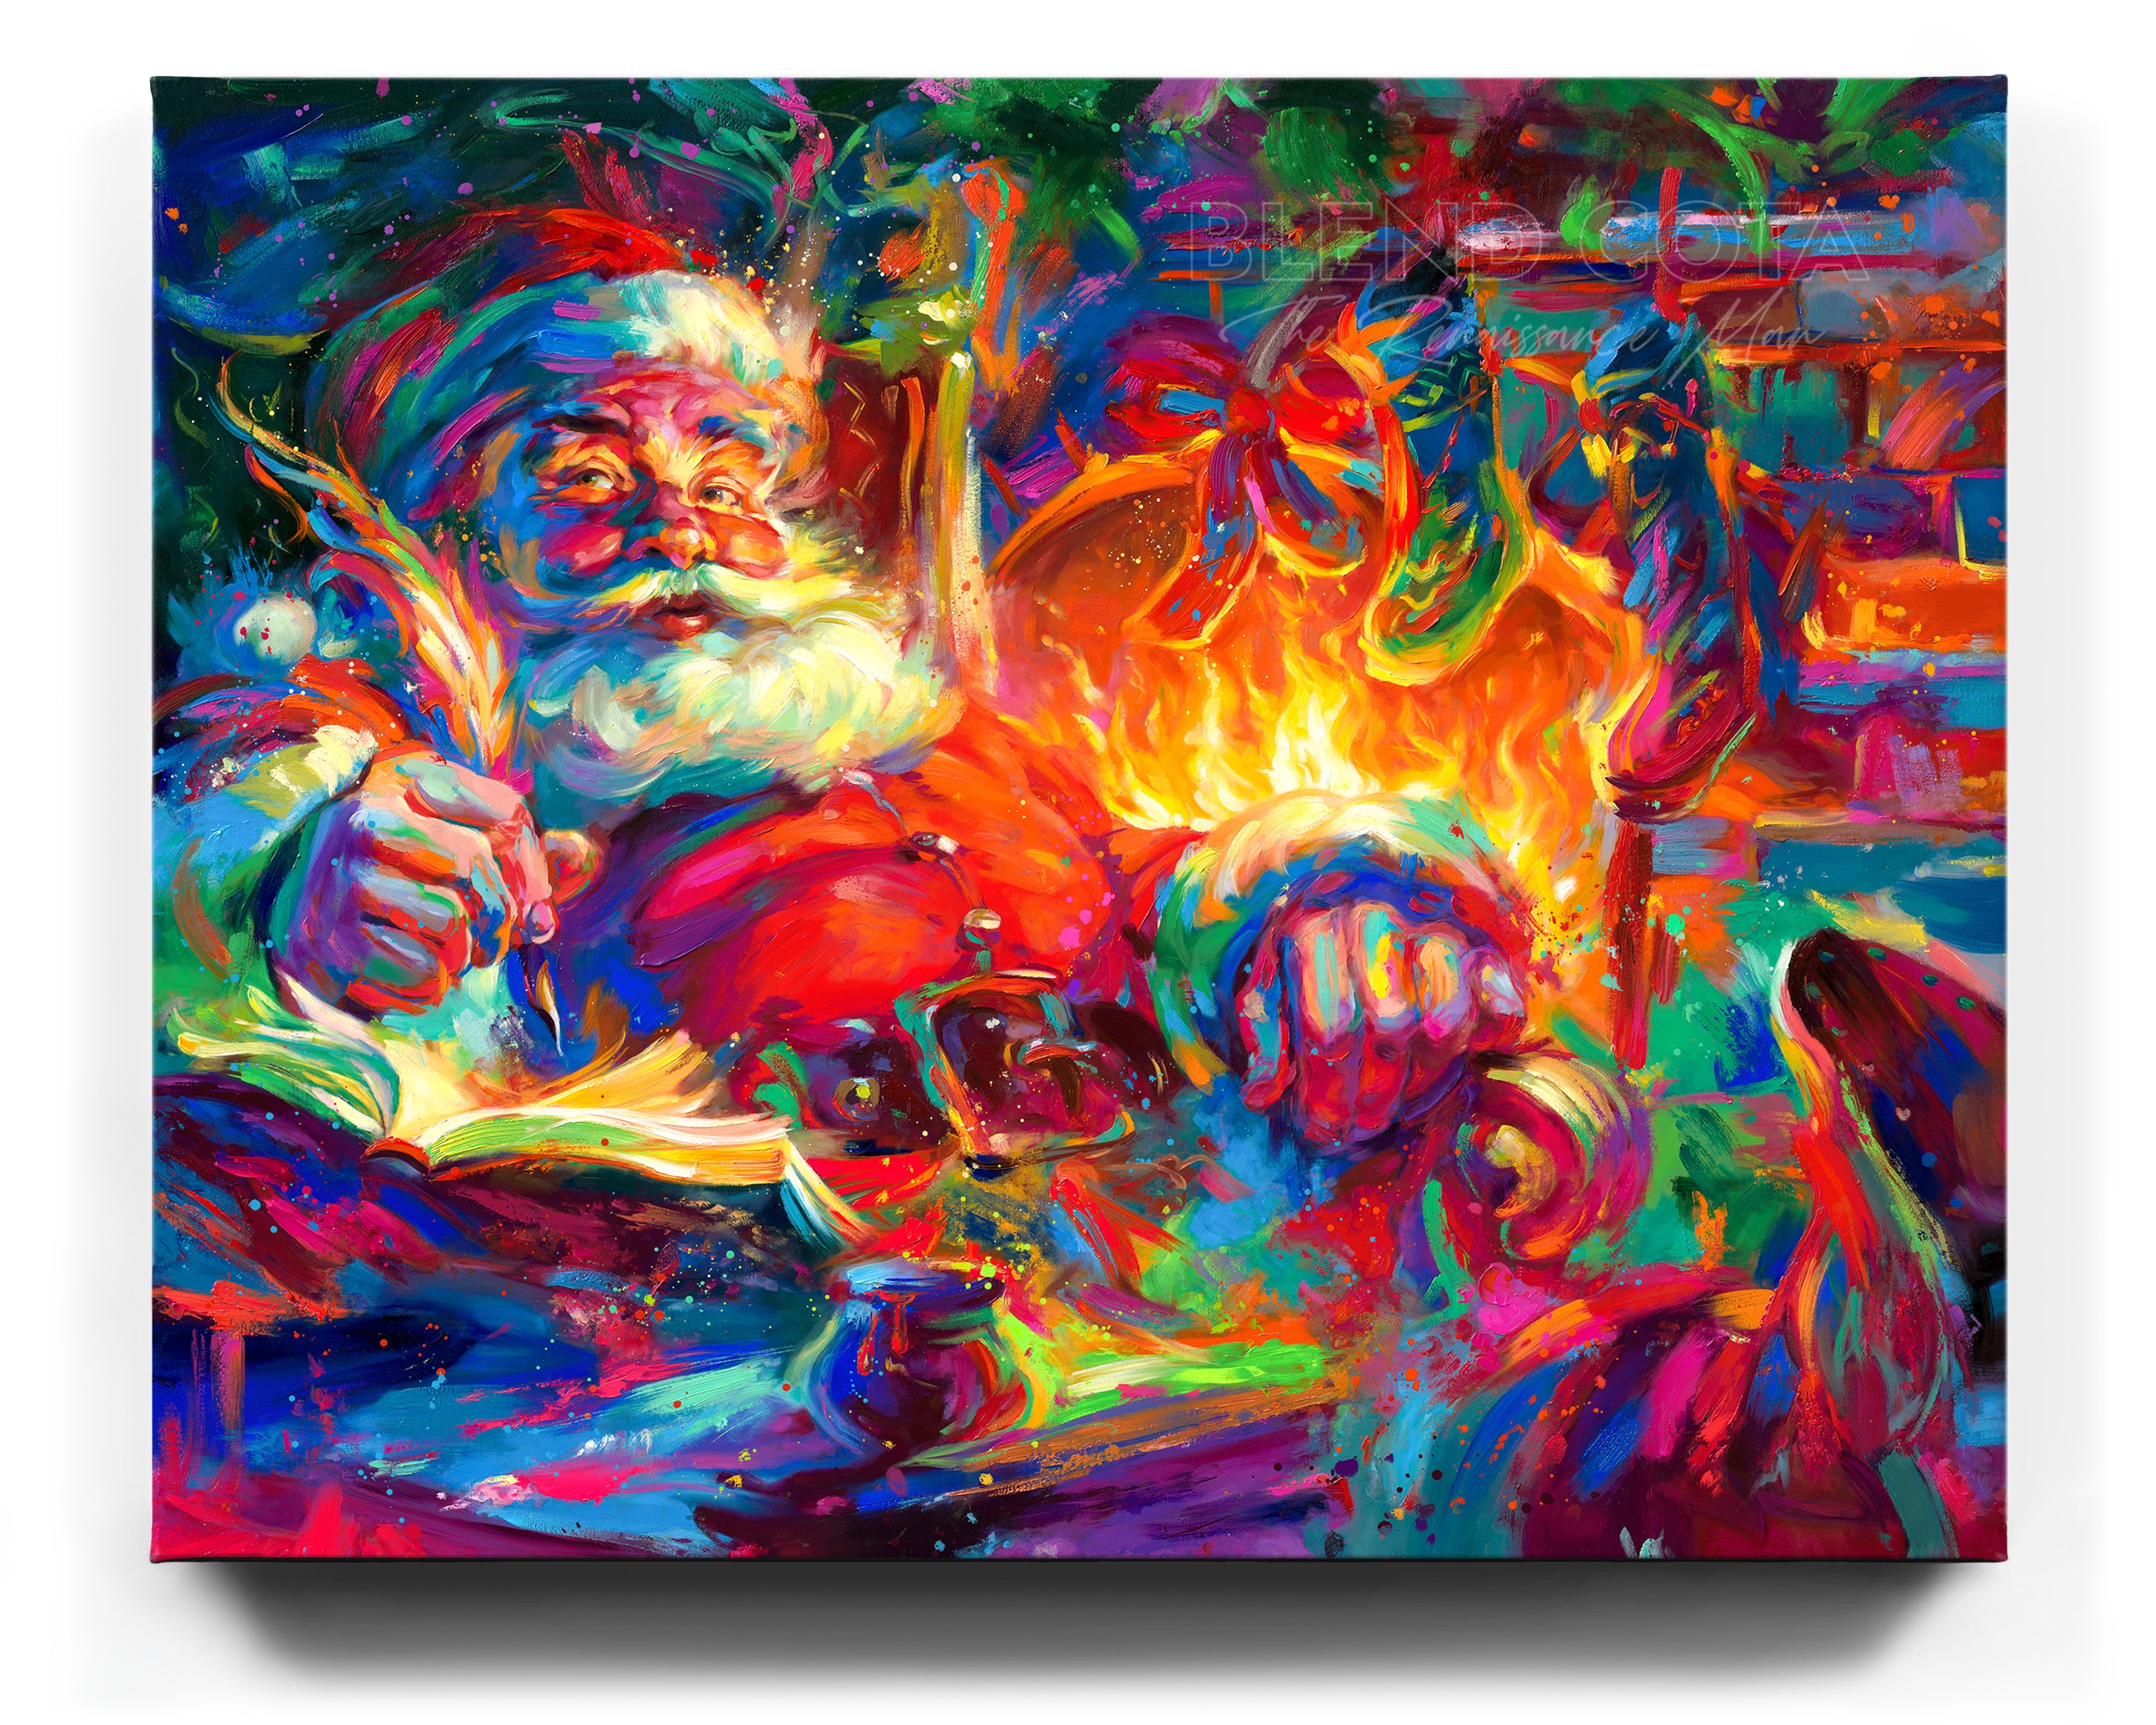 Santa painted by Blend Cota Limited Edition Art Framed on Canvas from Blend Cota Studios